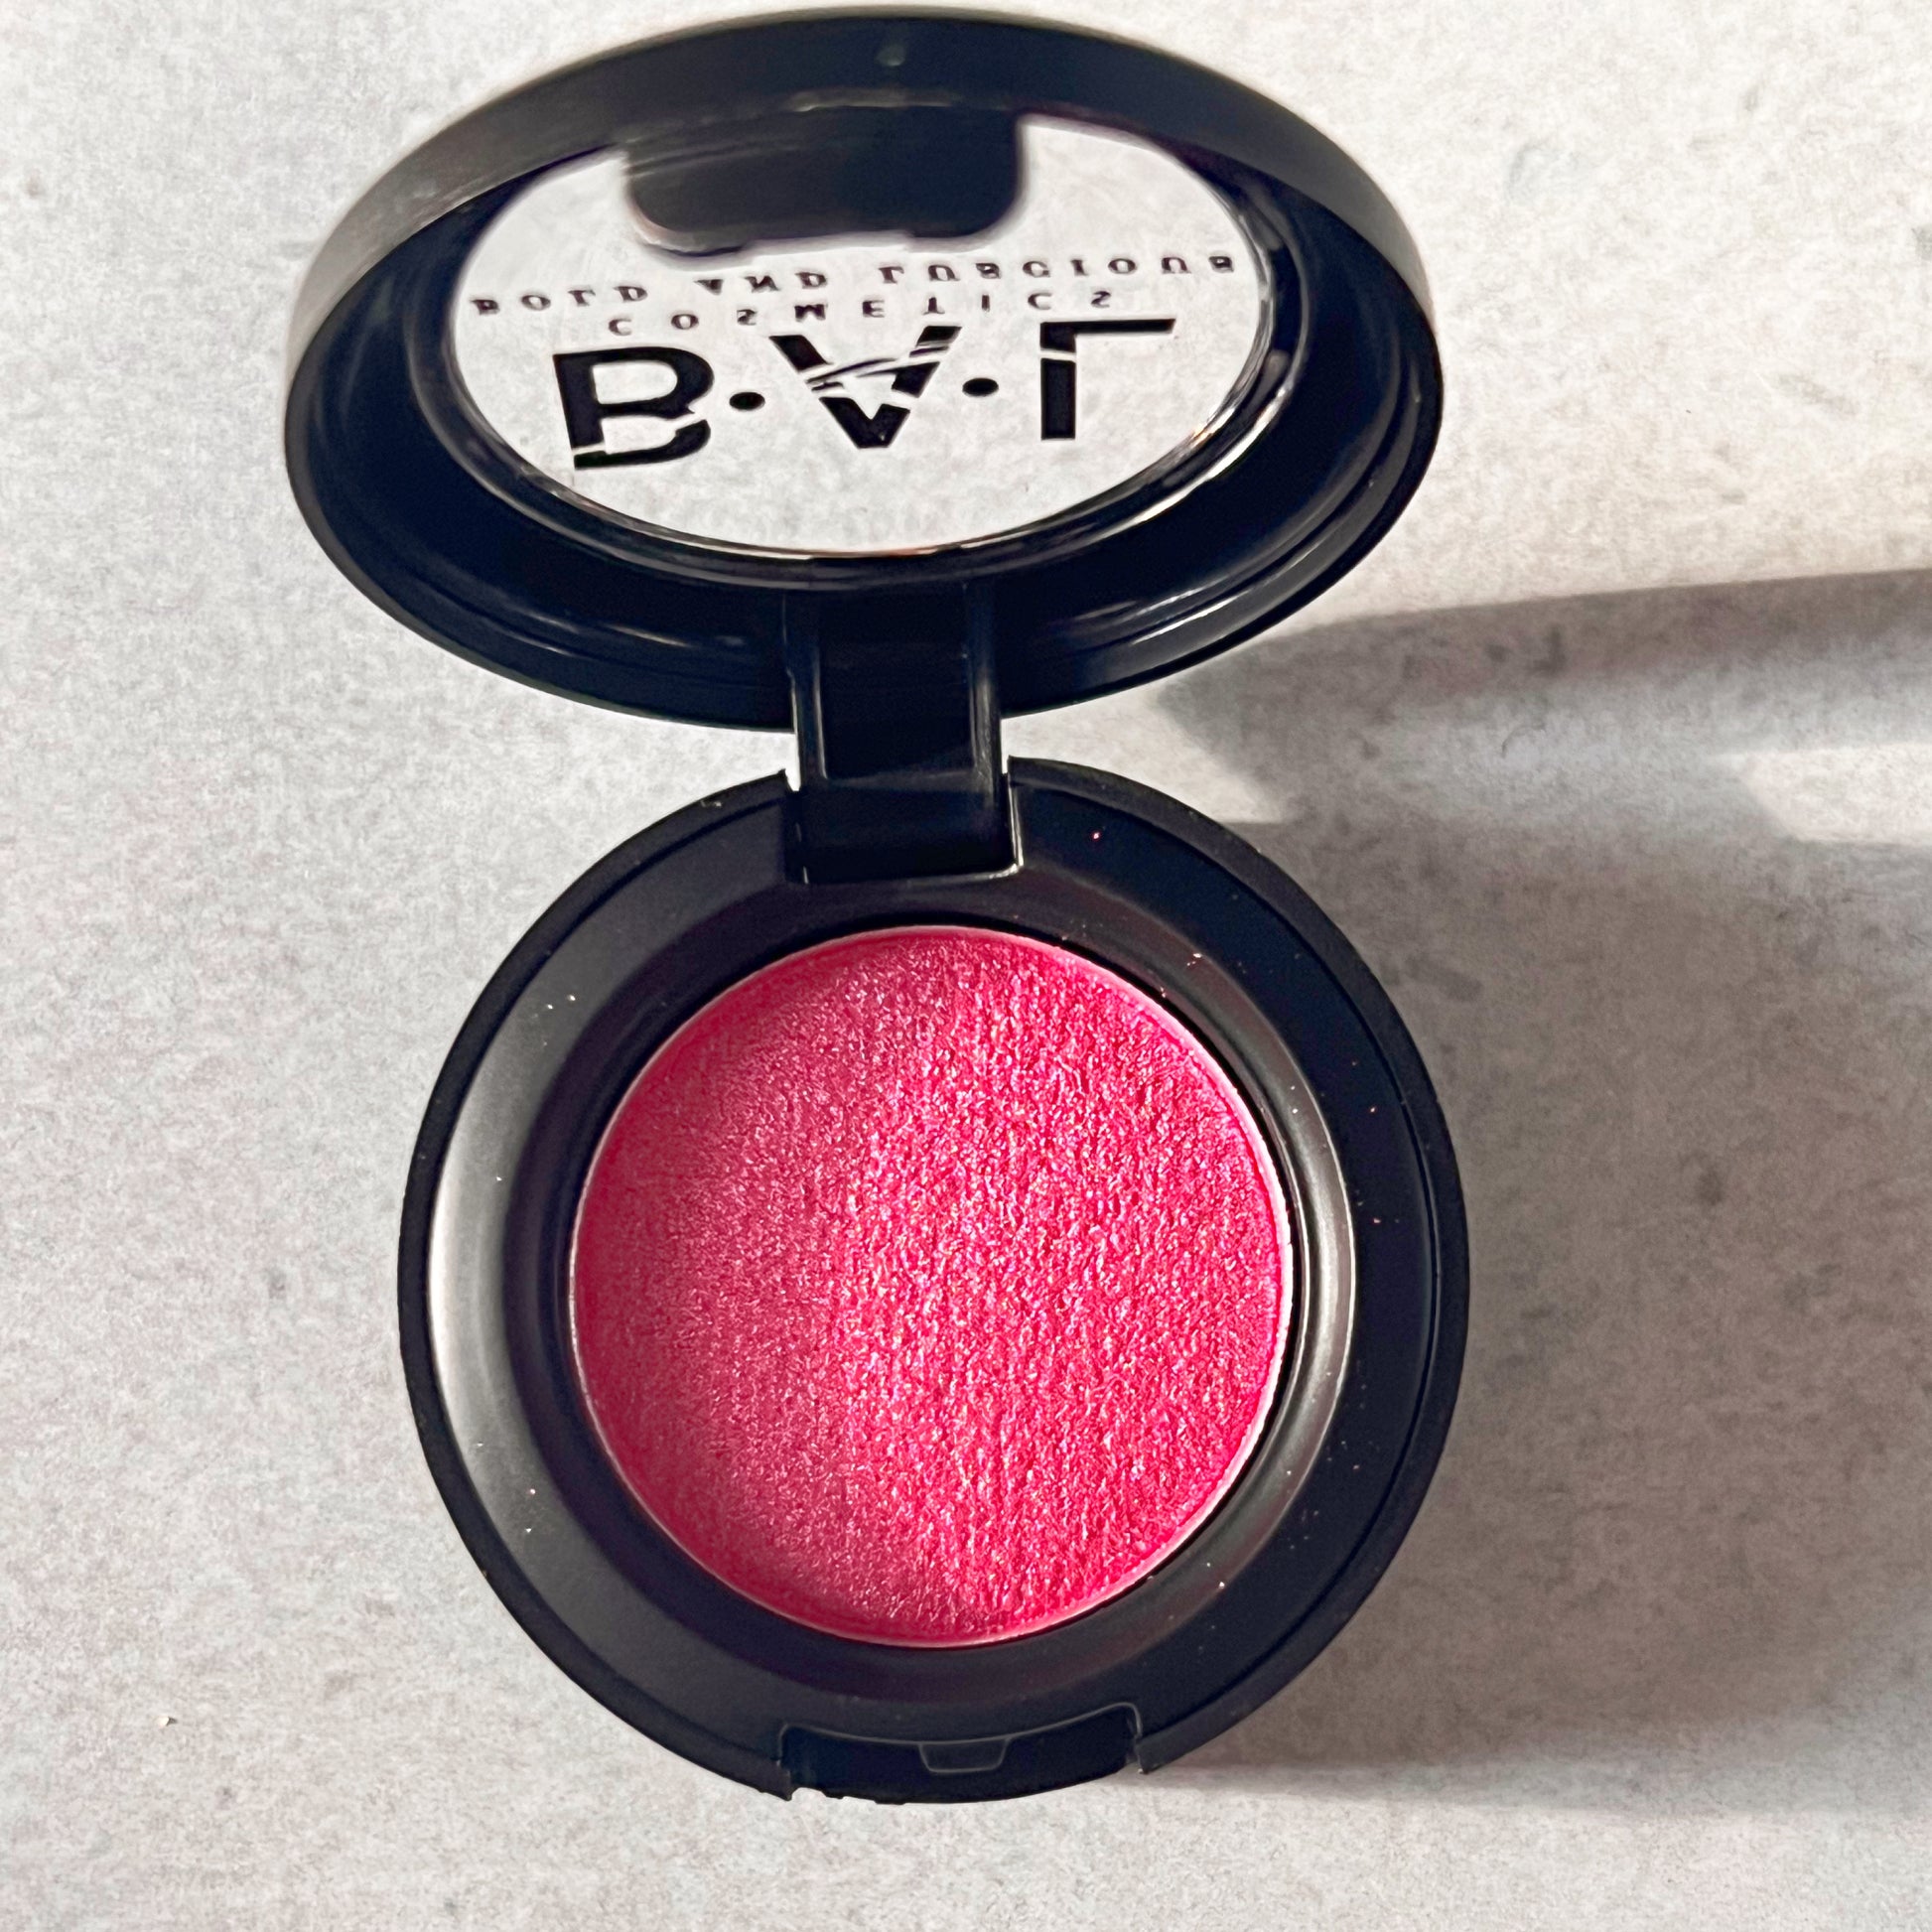 A single Pan Eye shadow that is a shimmery red.